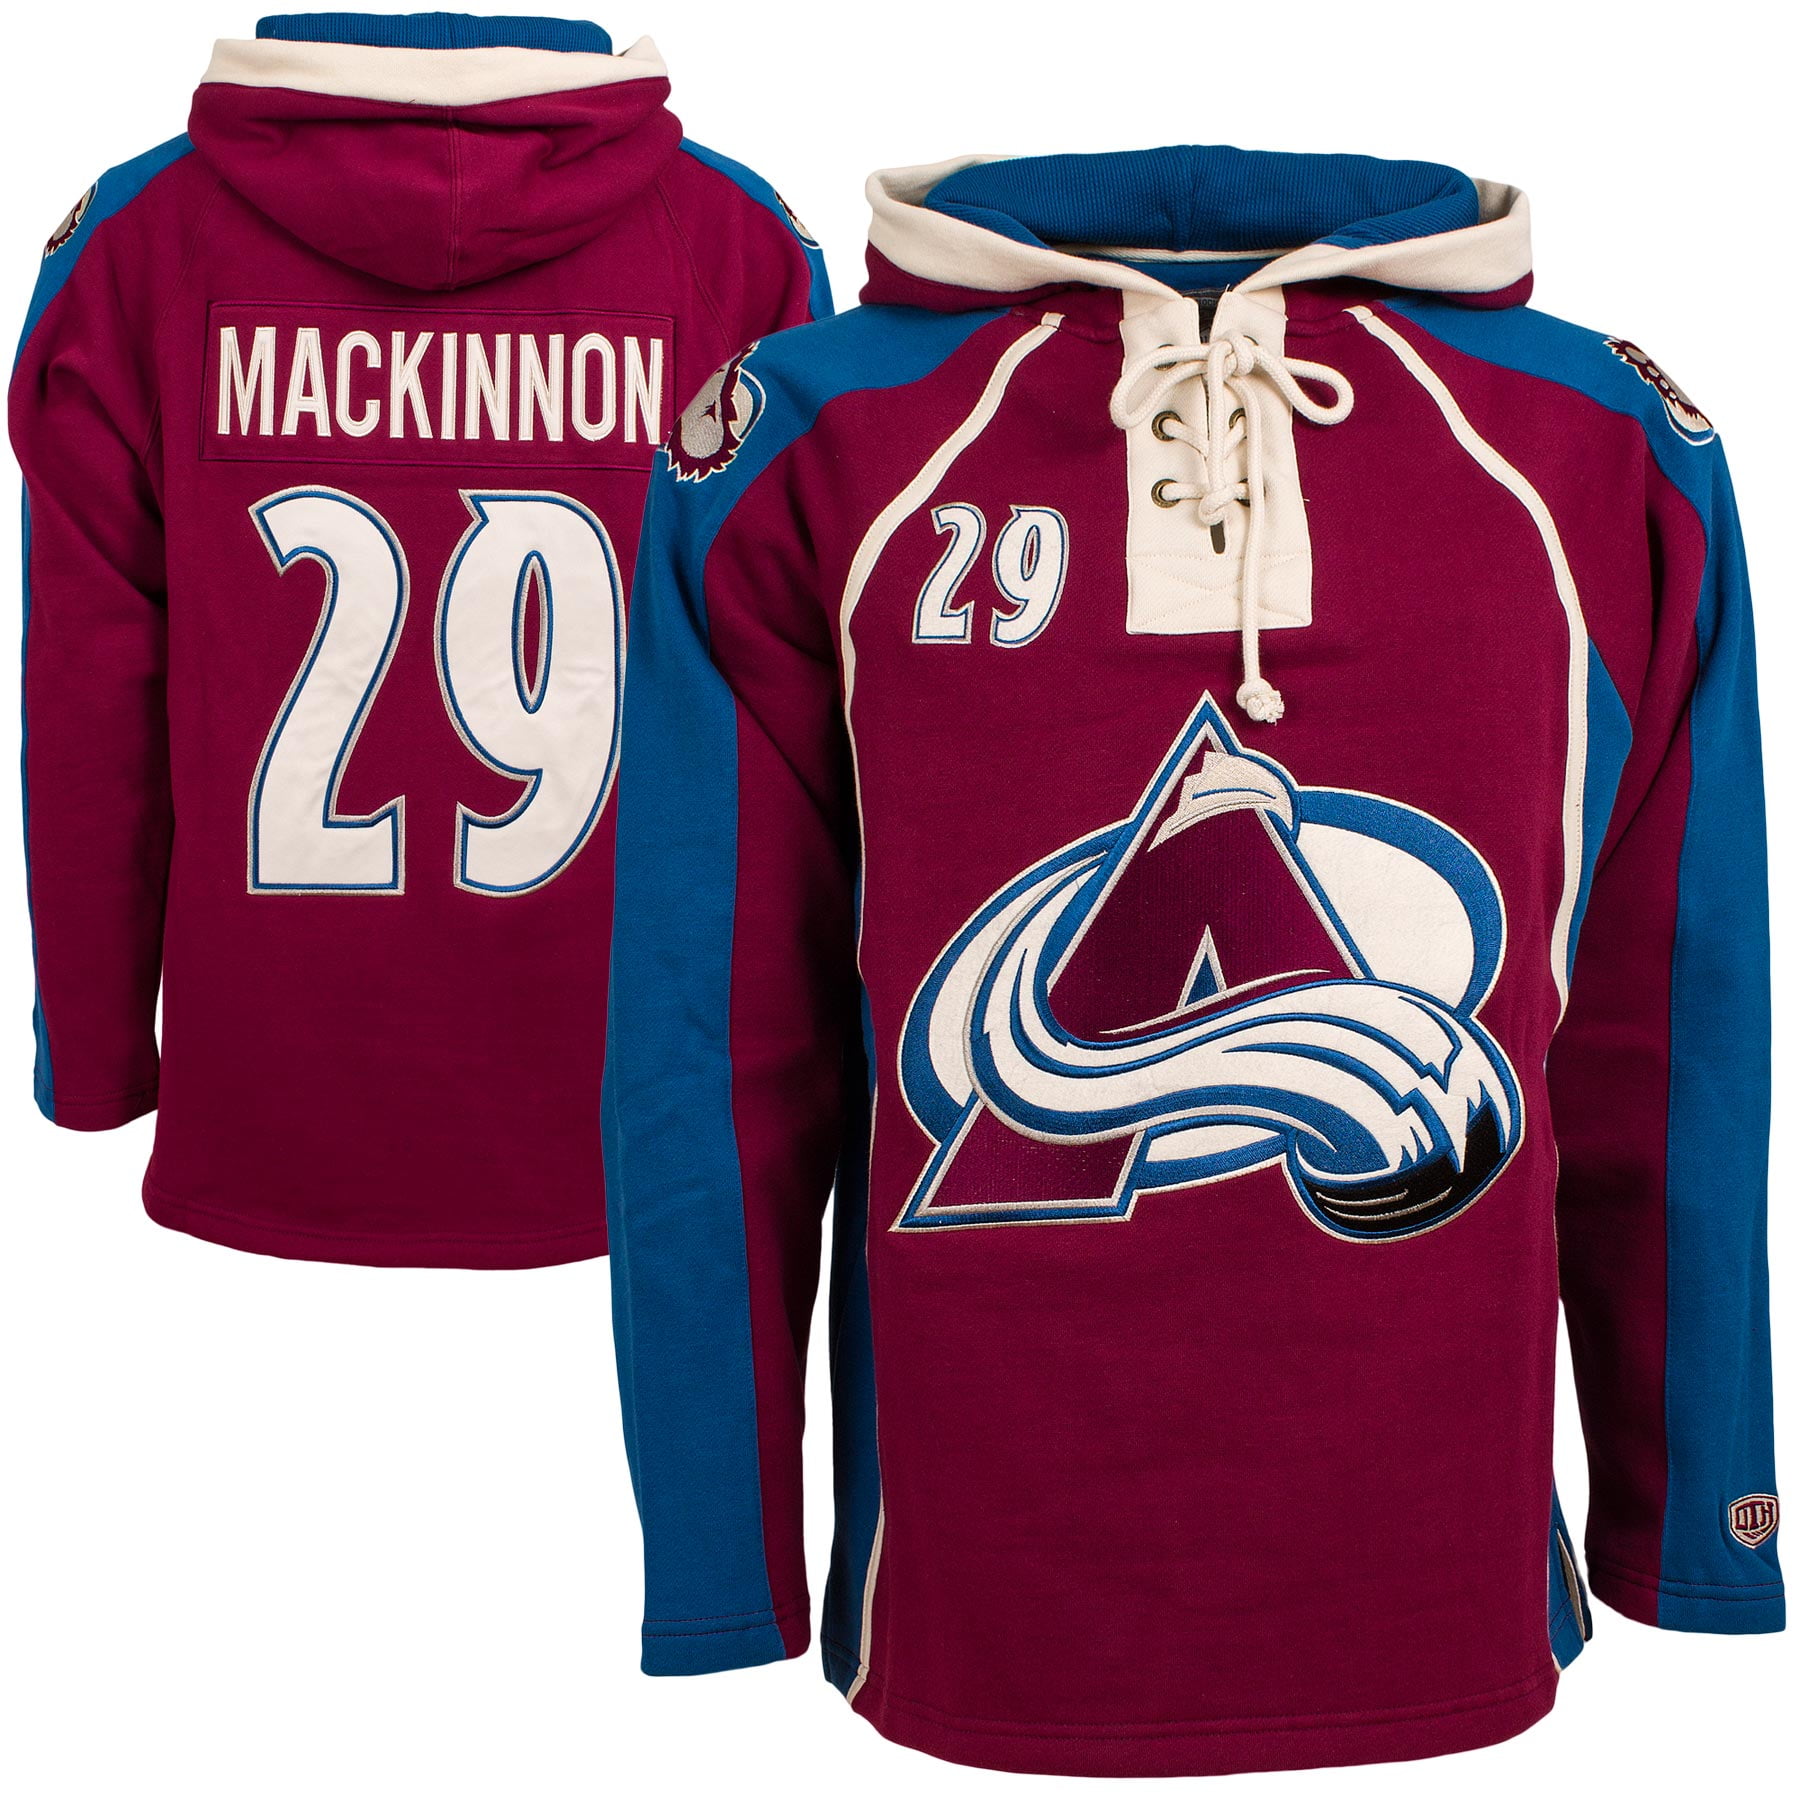 avalanche hoodie jersey